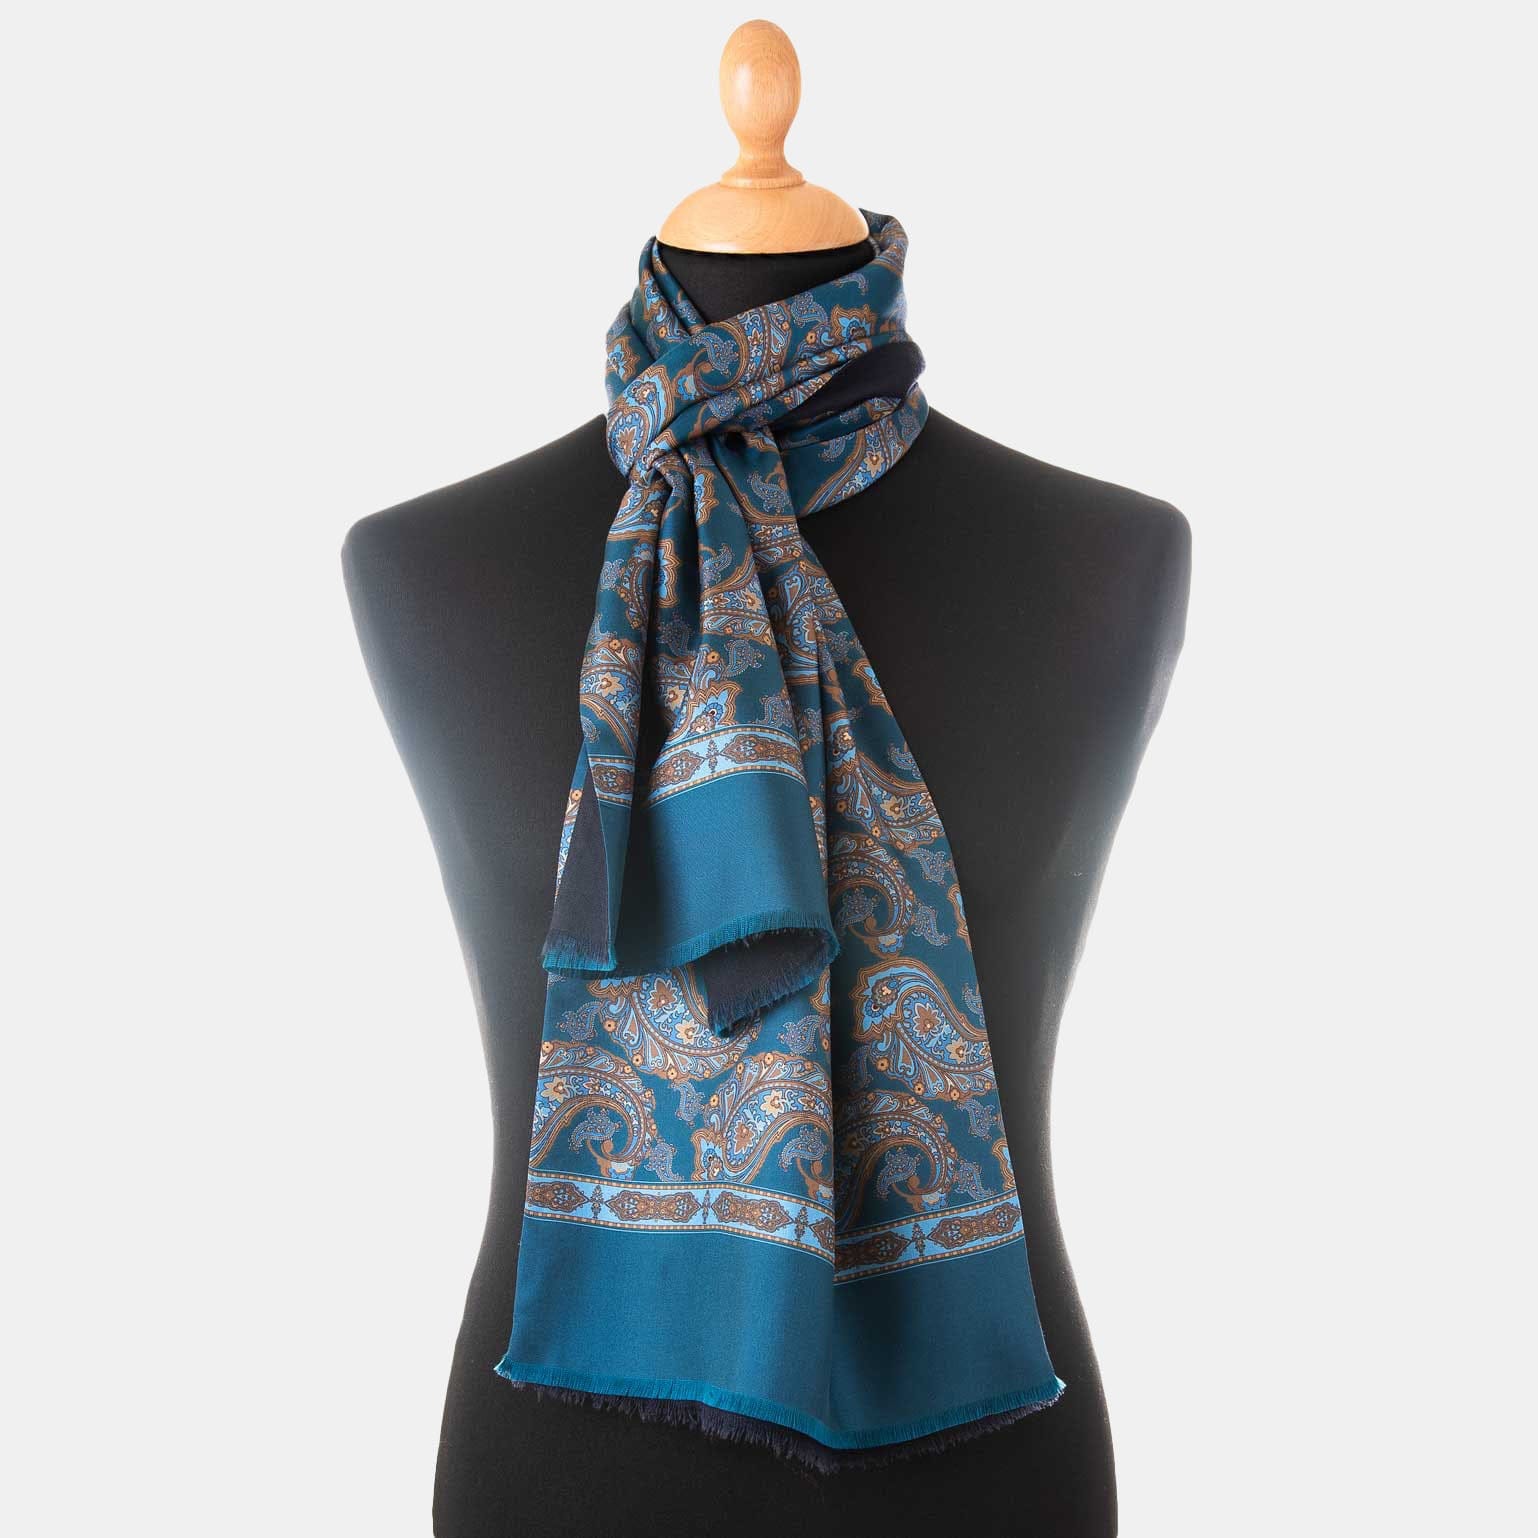 Italian Wool Reversible Scarf - Paisley to Chevron in Navy, Grey, and  Silver by Dion